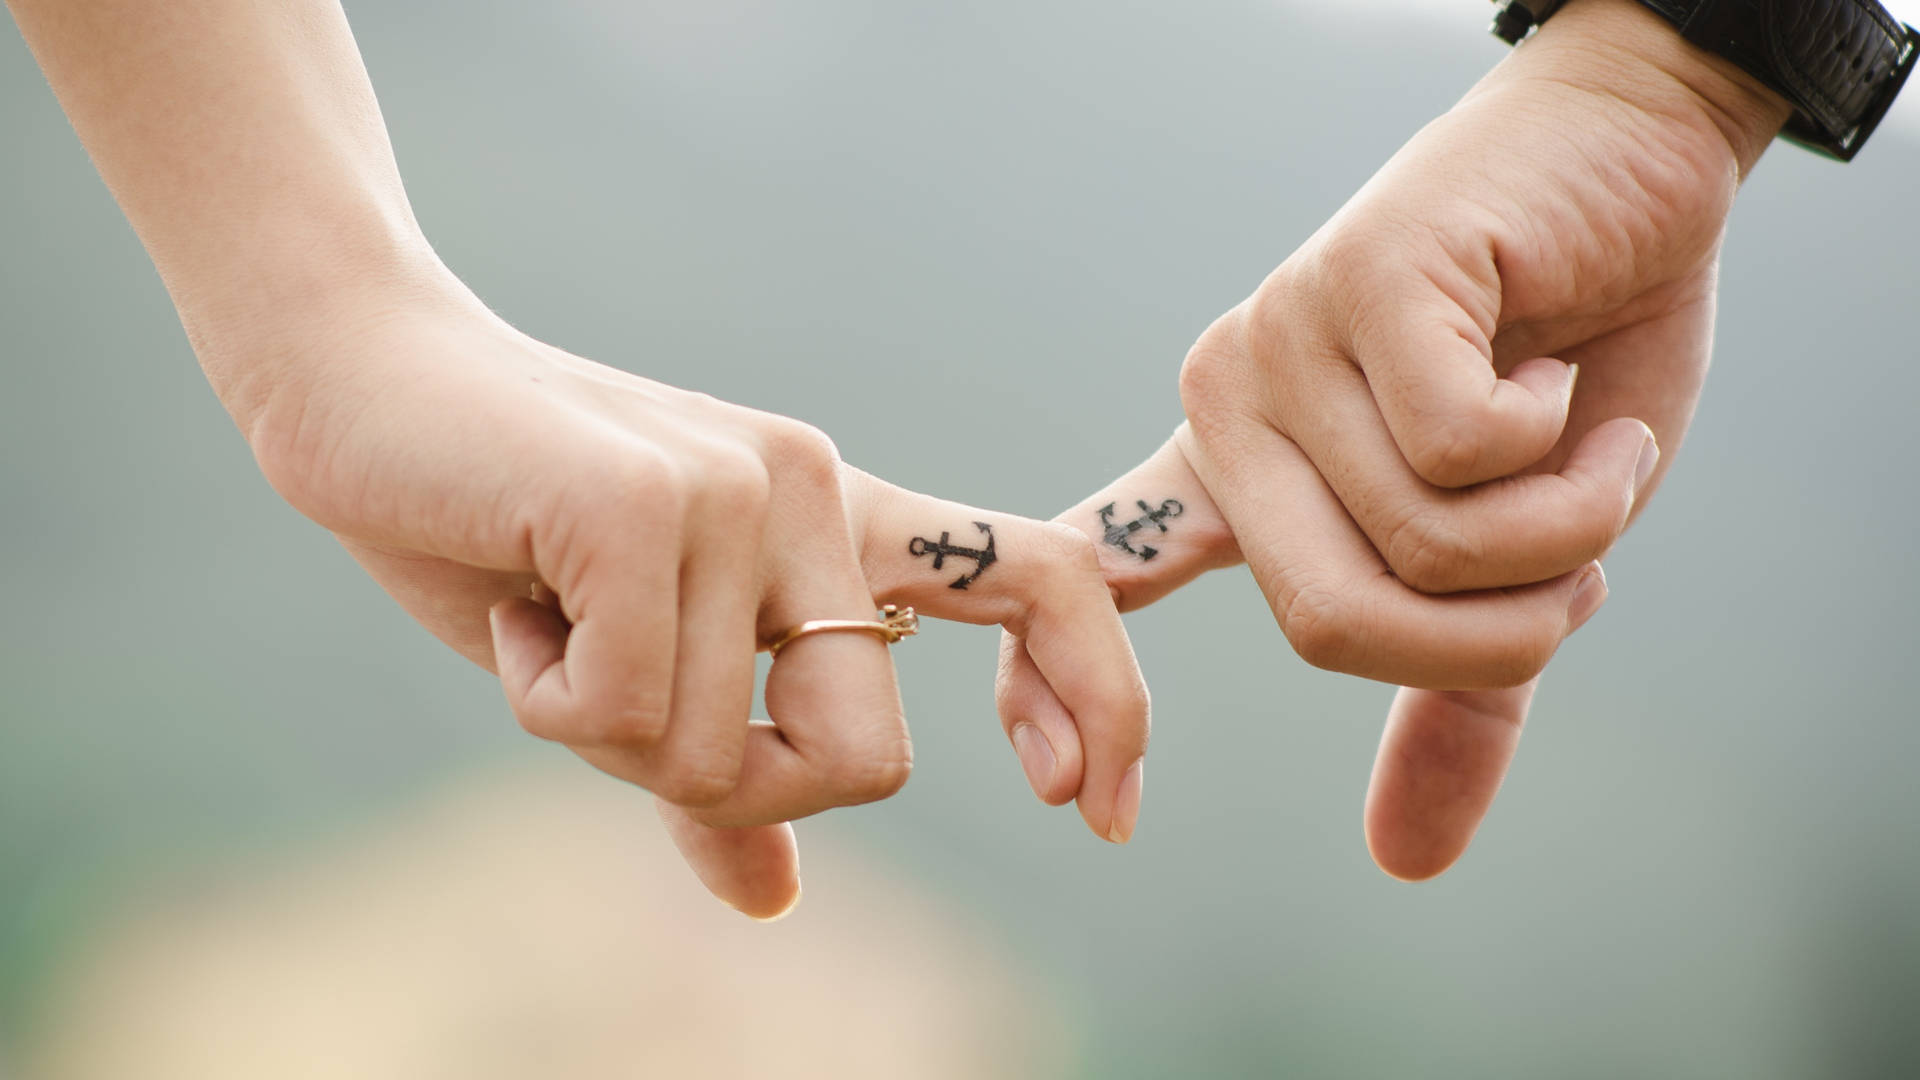 Sweet Holding Hands With Anchor Tattoos